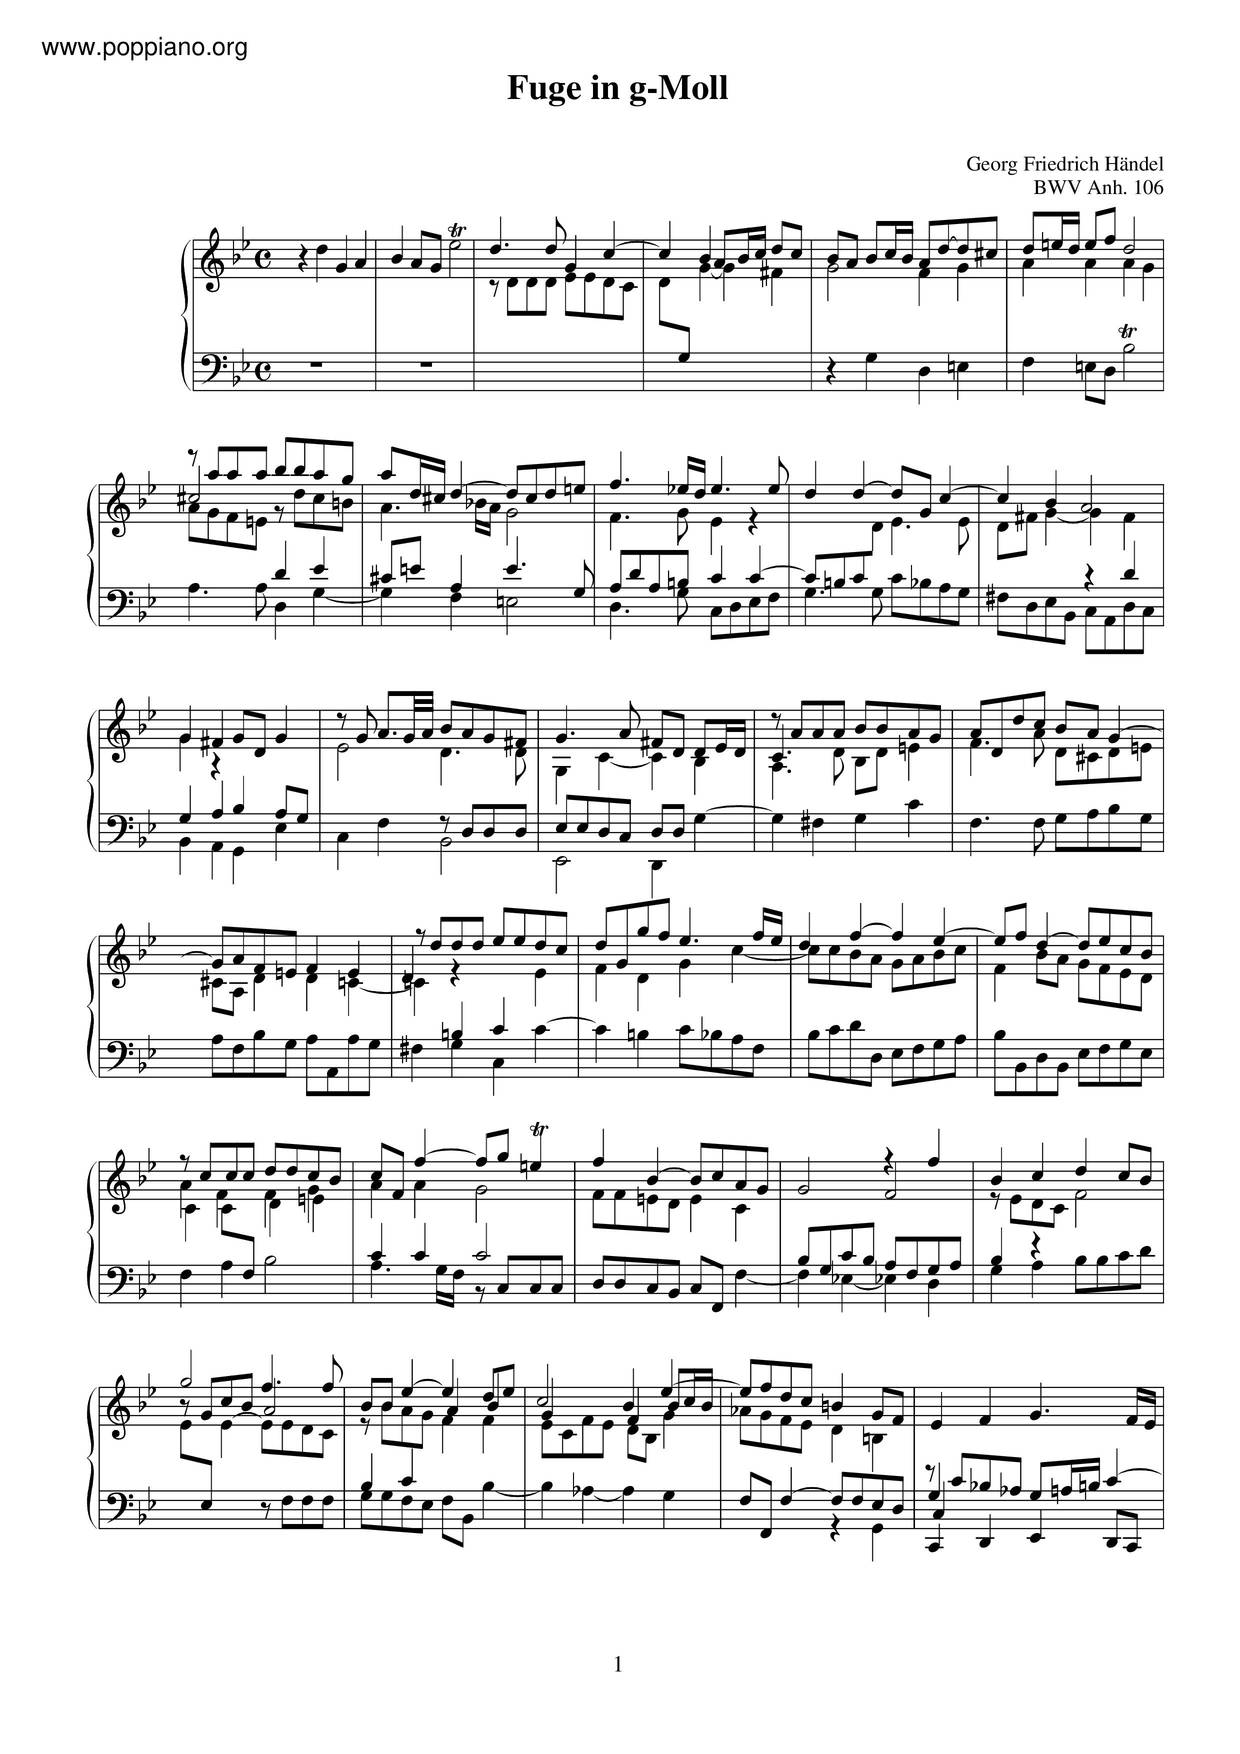 Fugue In G Minor, BWV Anh. 106 Score